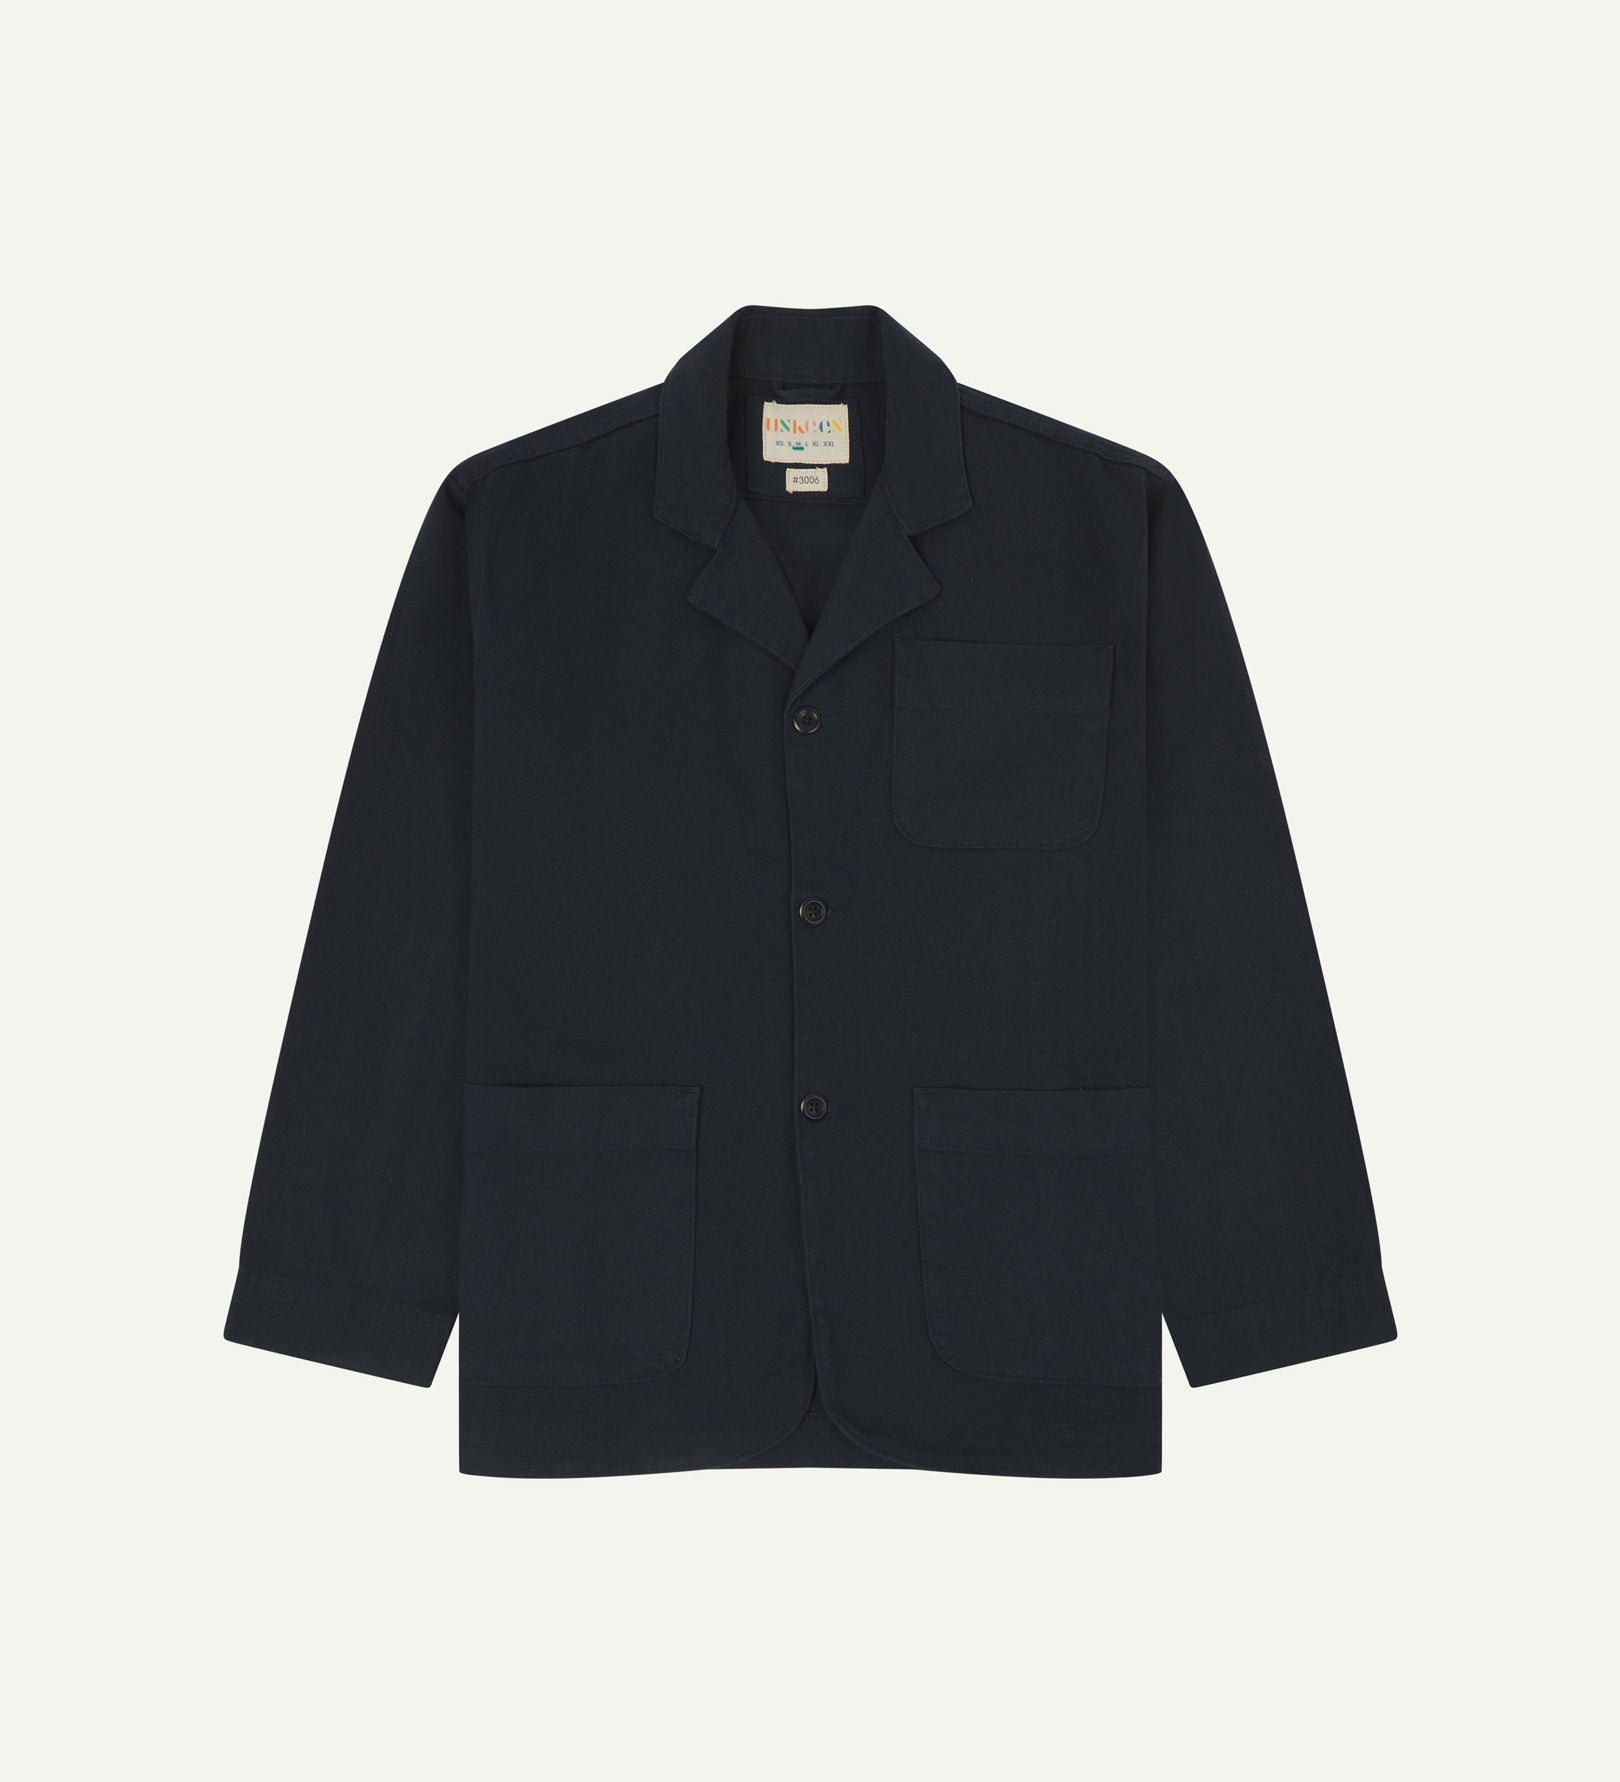 Dark blue (blueberry) buttoned organic cotton-drill blazer from Uskees with clear view of three patch pockets and Uskees branding label.